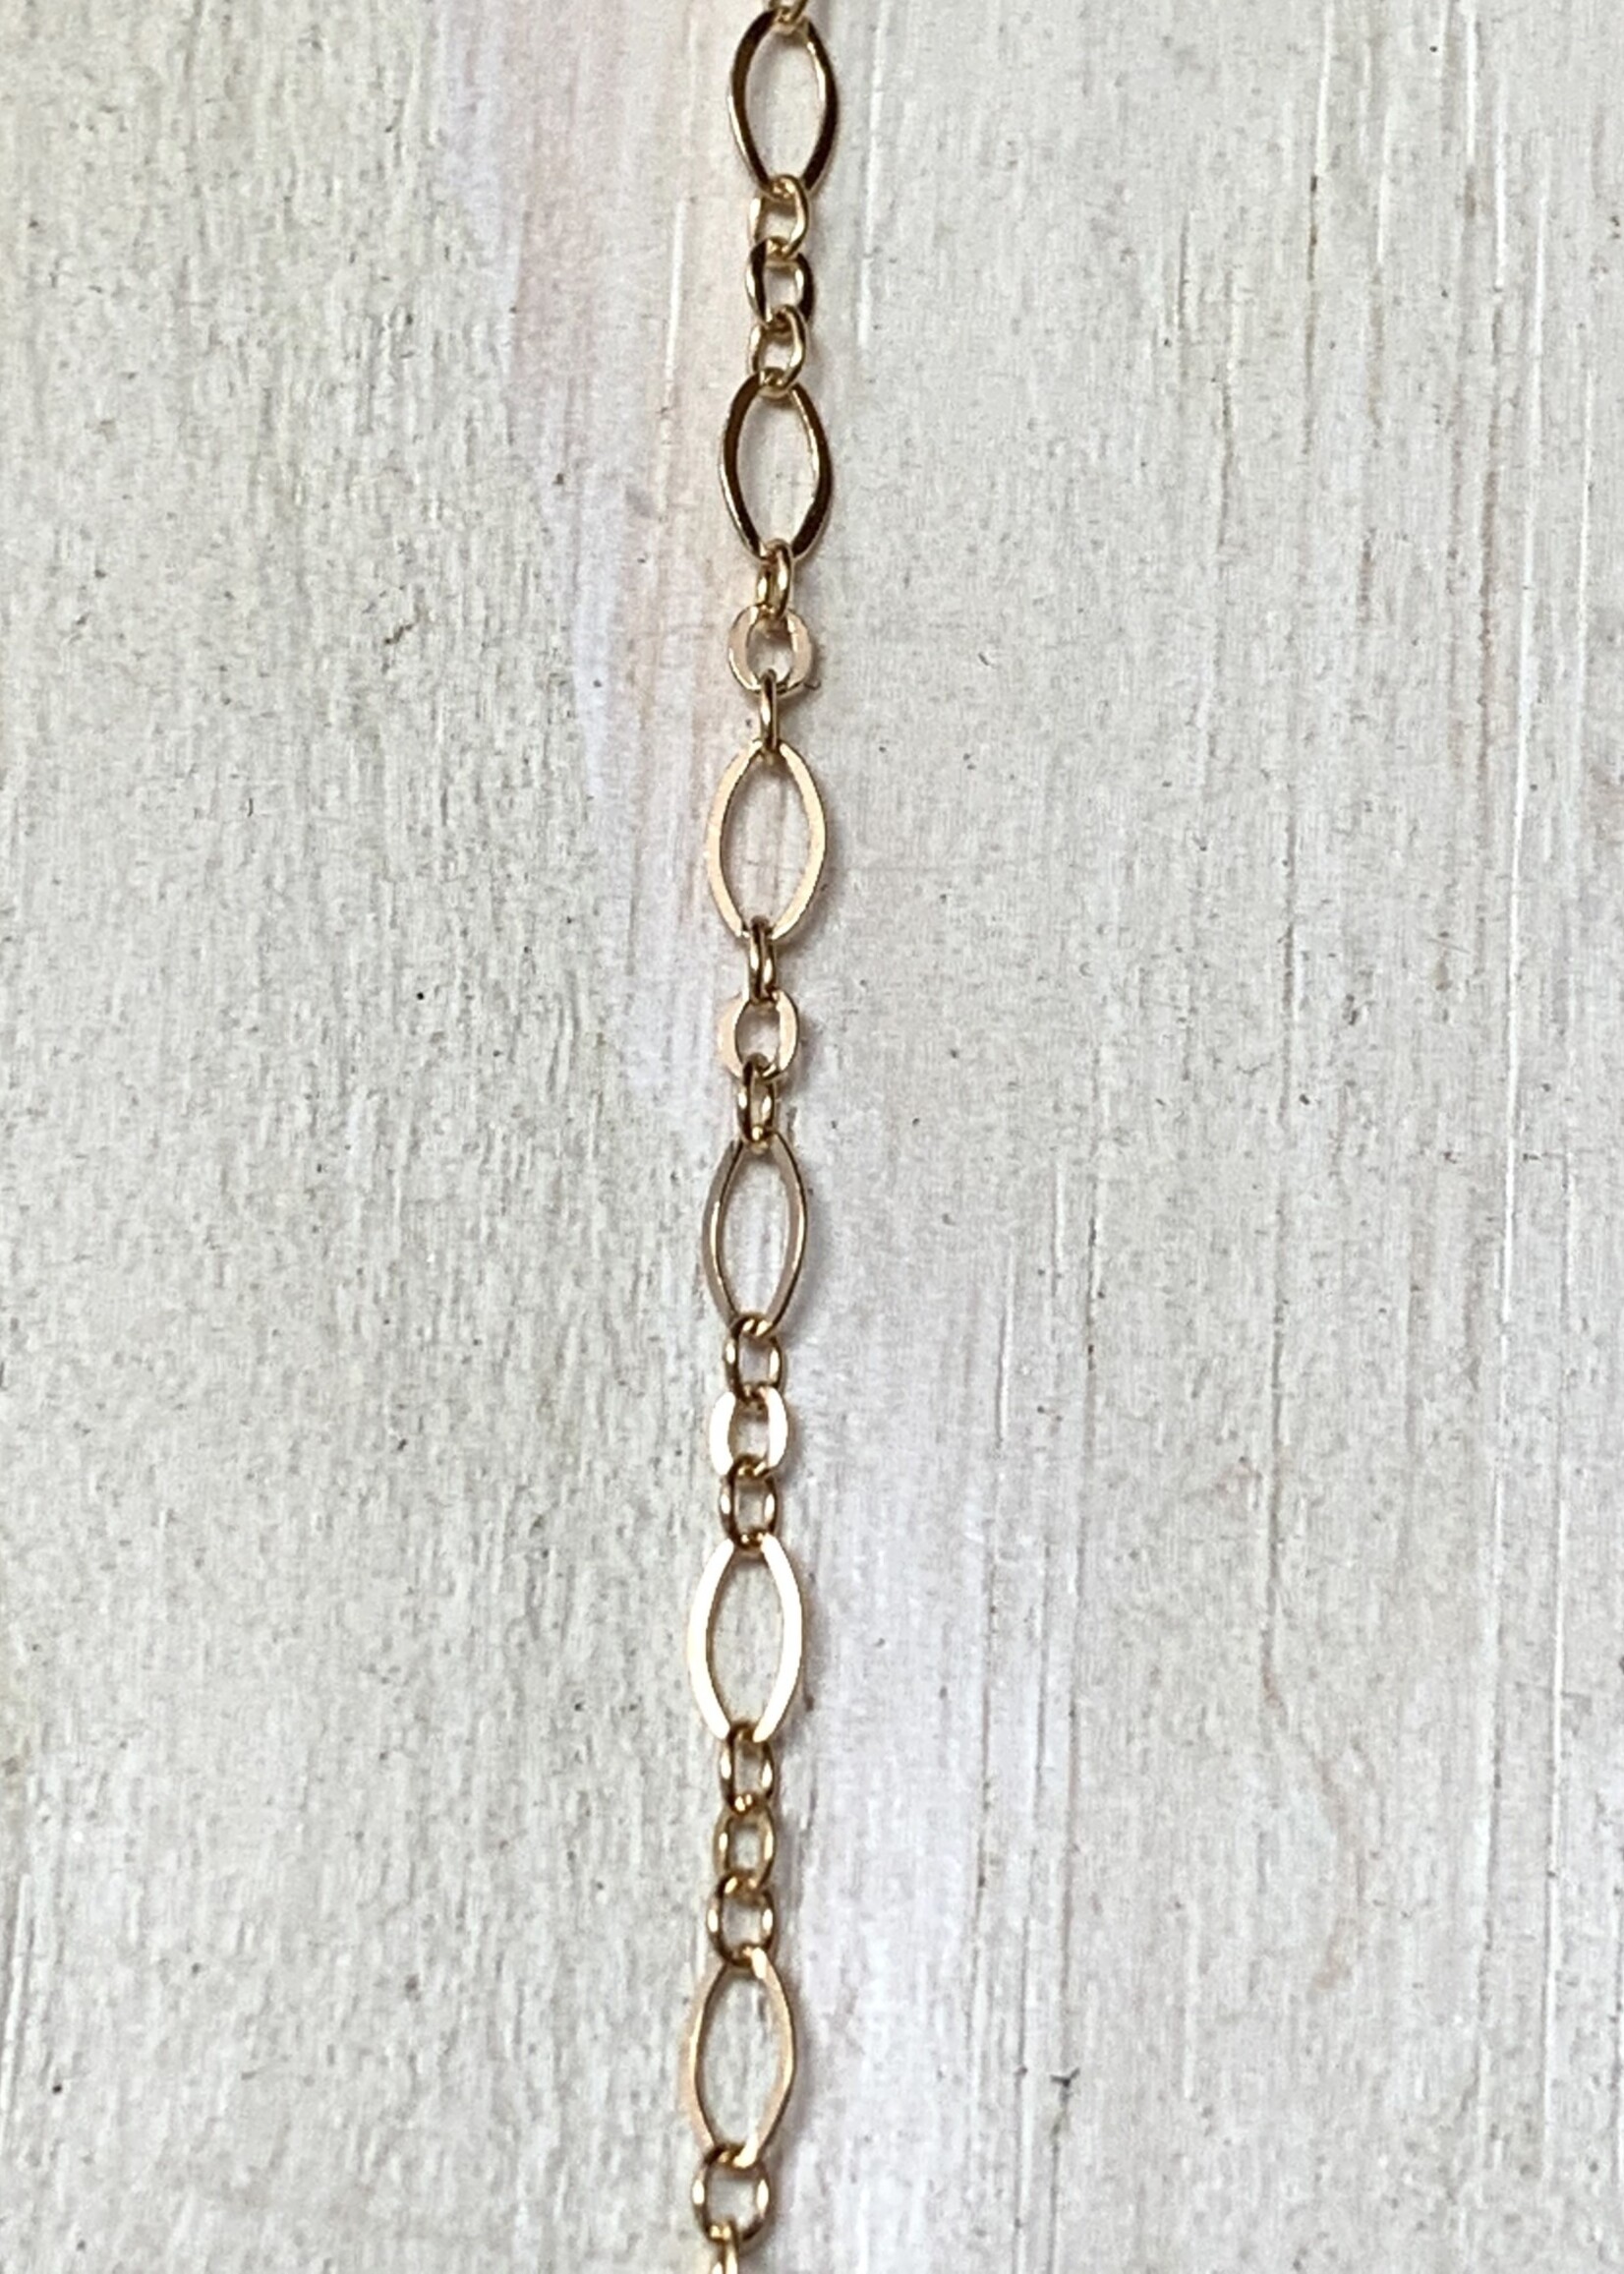 Long Short Chain 14k Gold Filled Inch